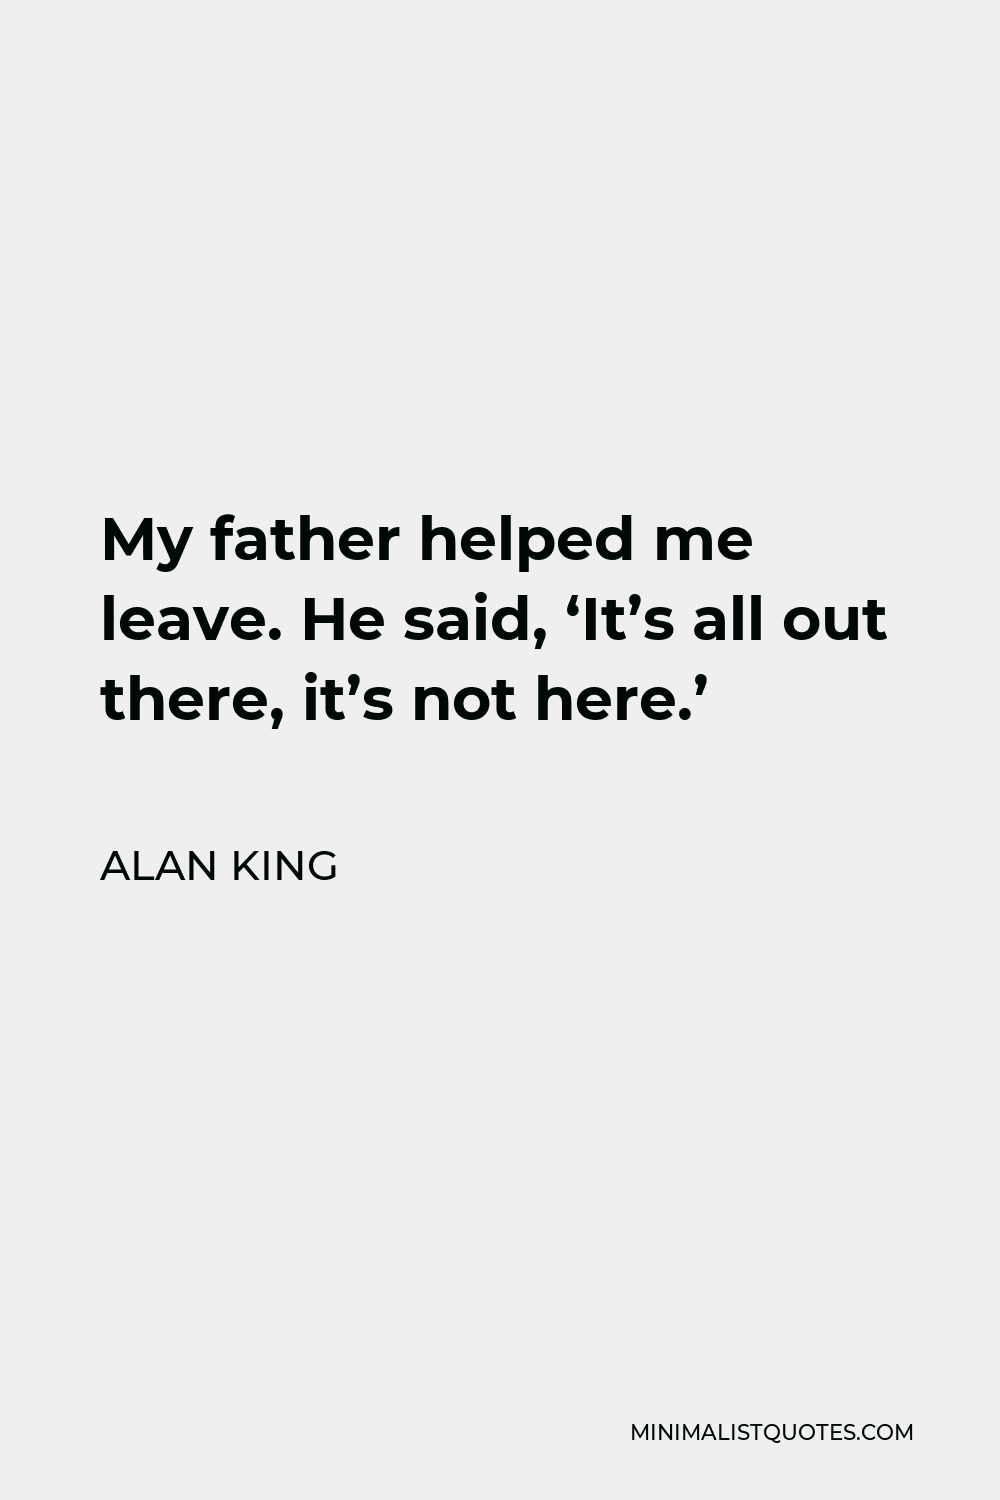 Alan King Quote - My father helped me leave. He said, ‘It’s all out there, it’s not here.’